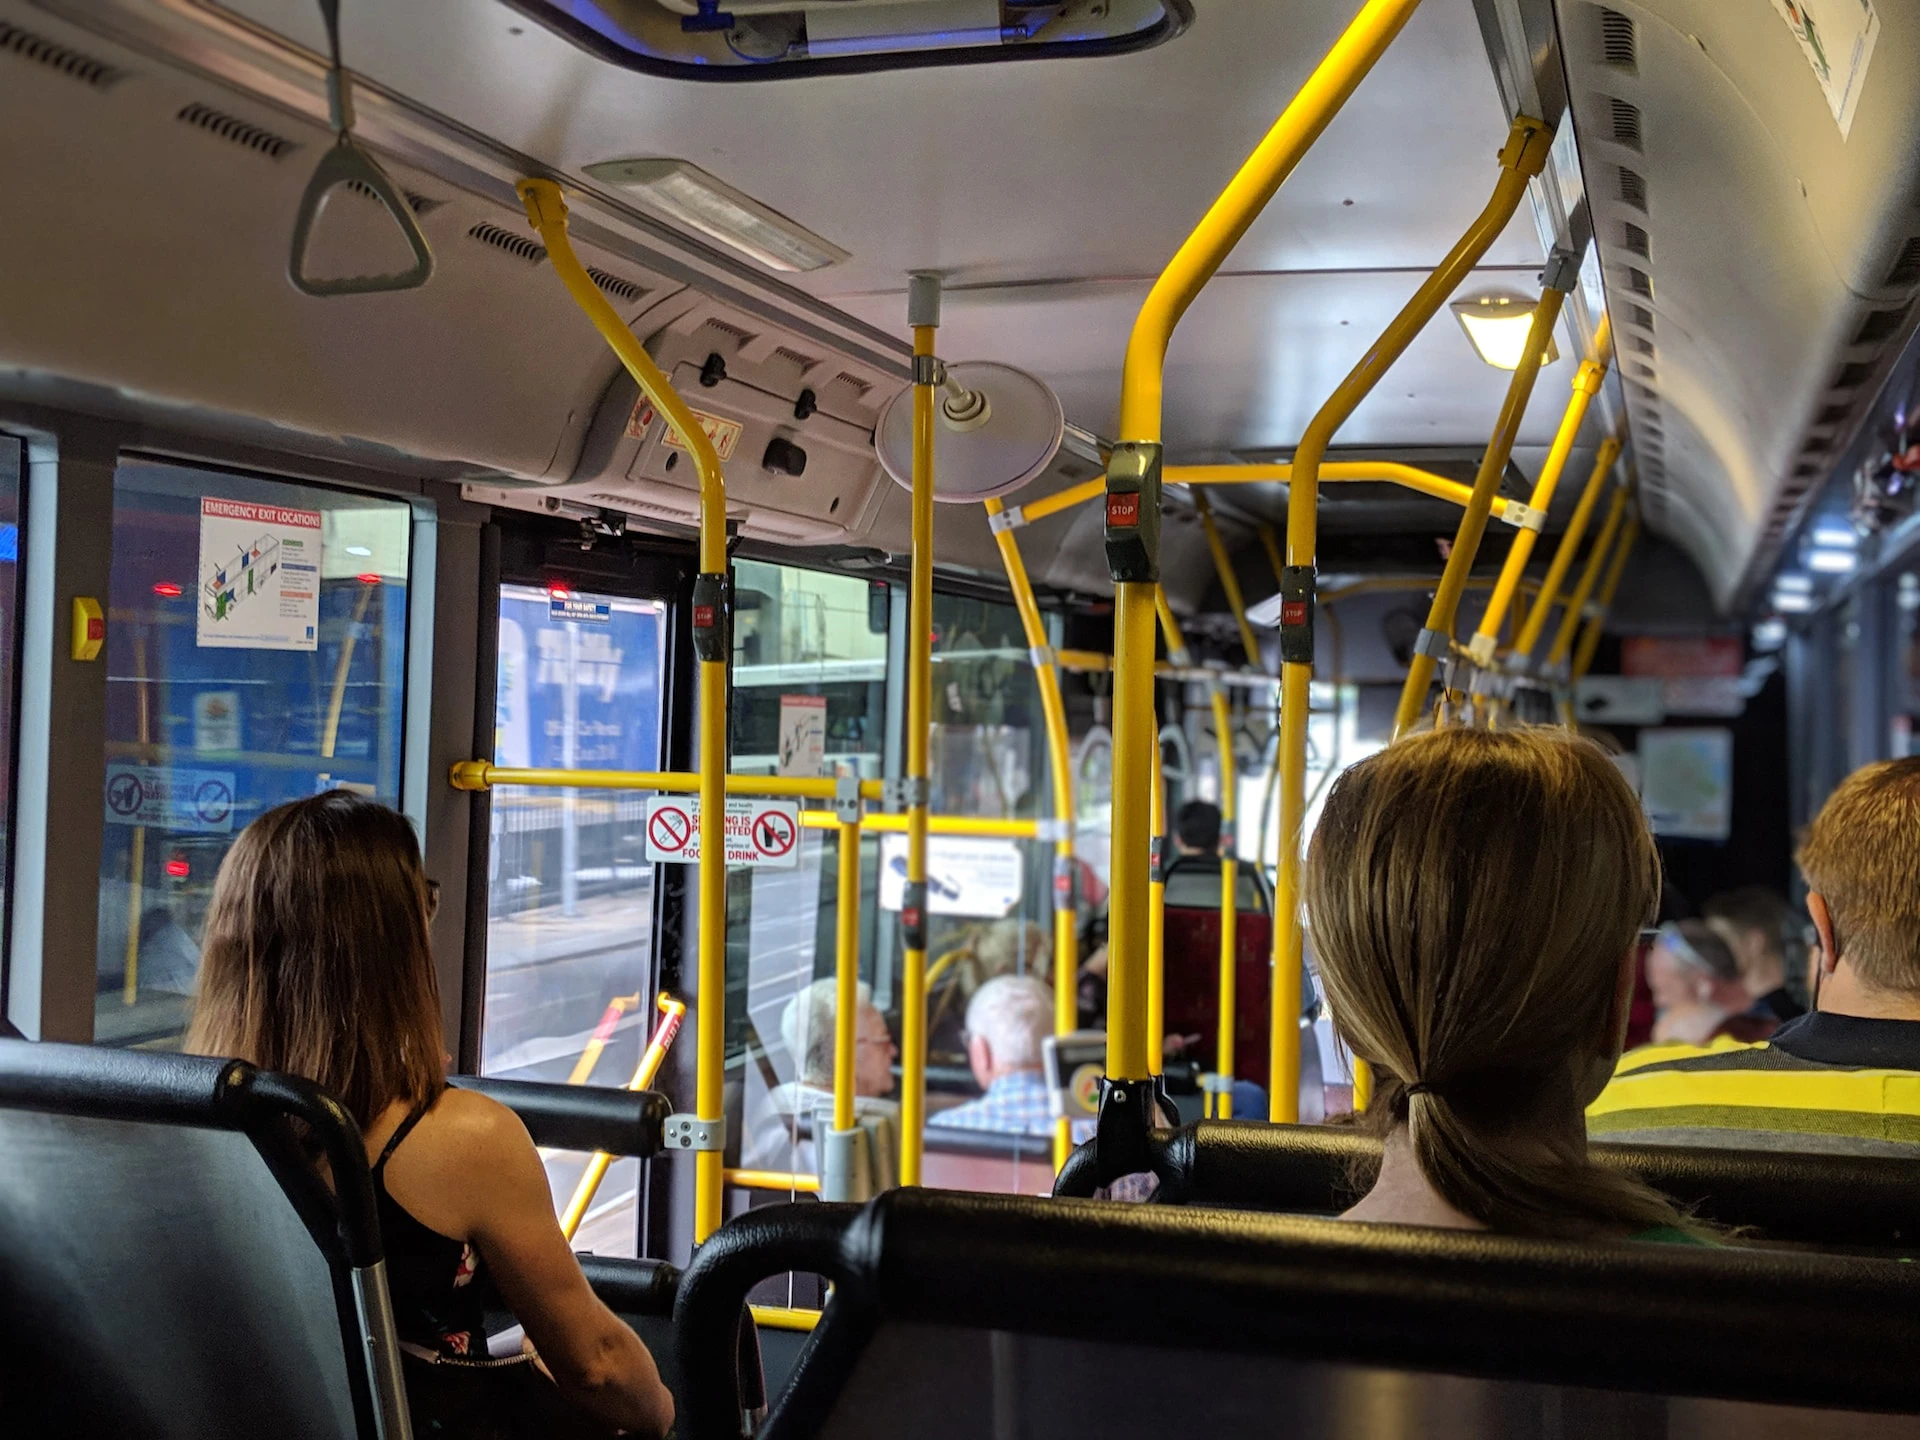 inside view of a bus with two people sitting down and yellow bars across the top